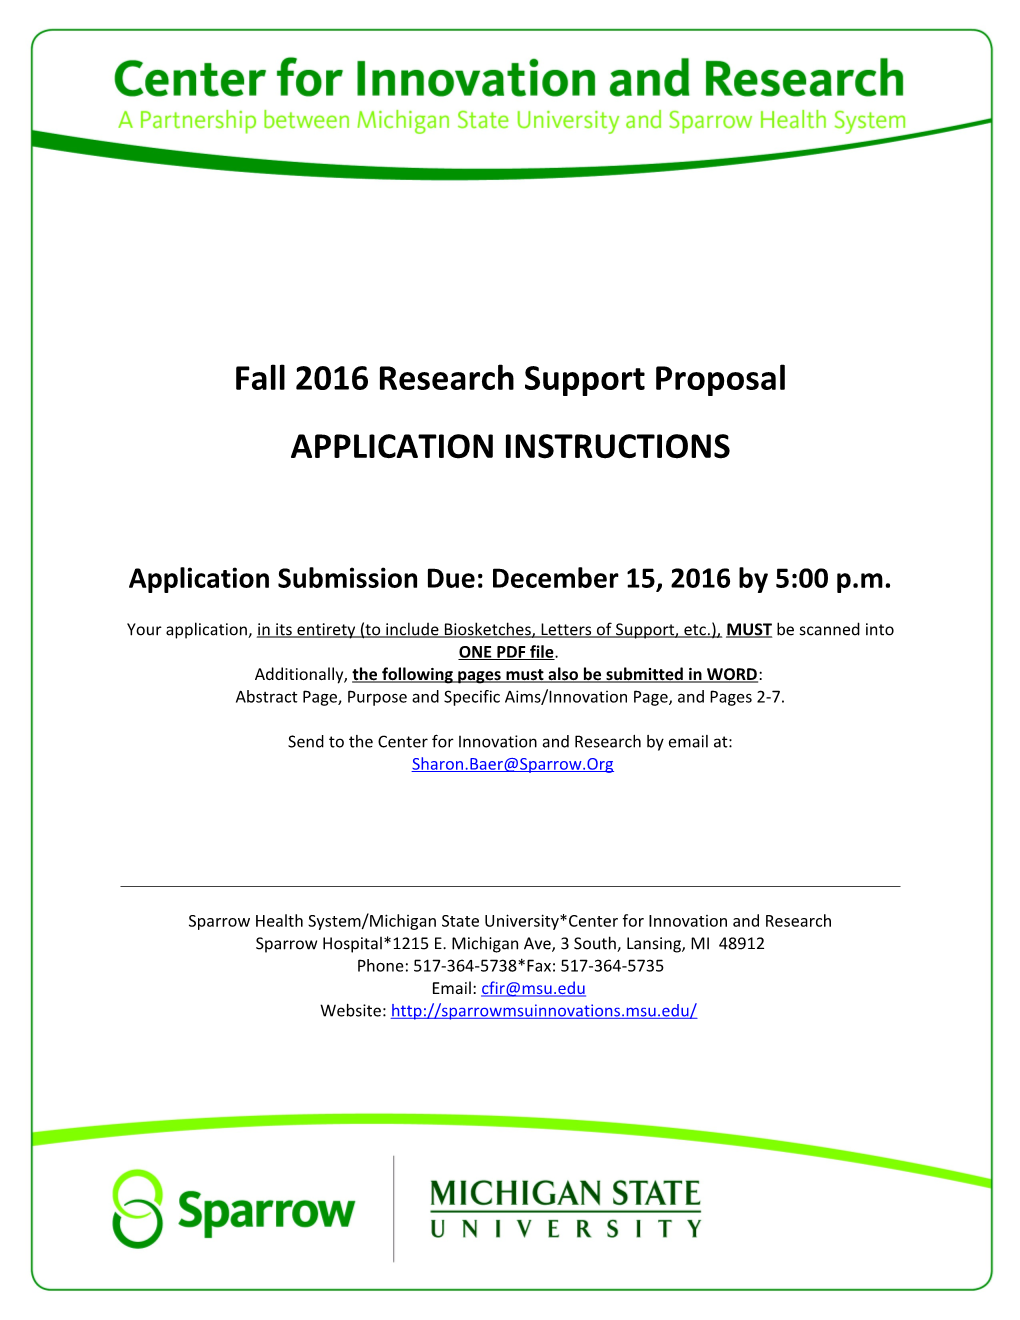 Fall 2016 Research Support Proposal